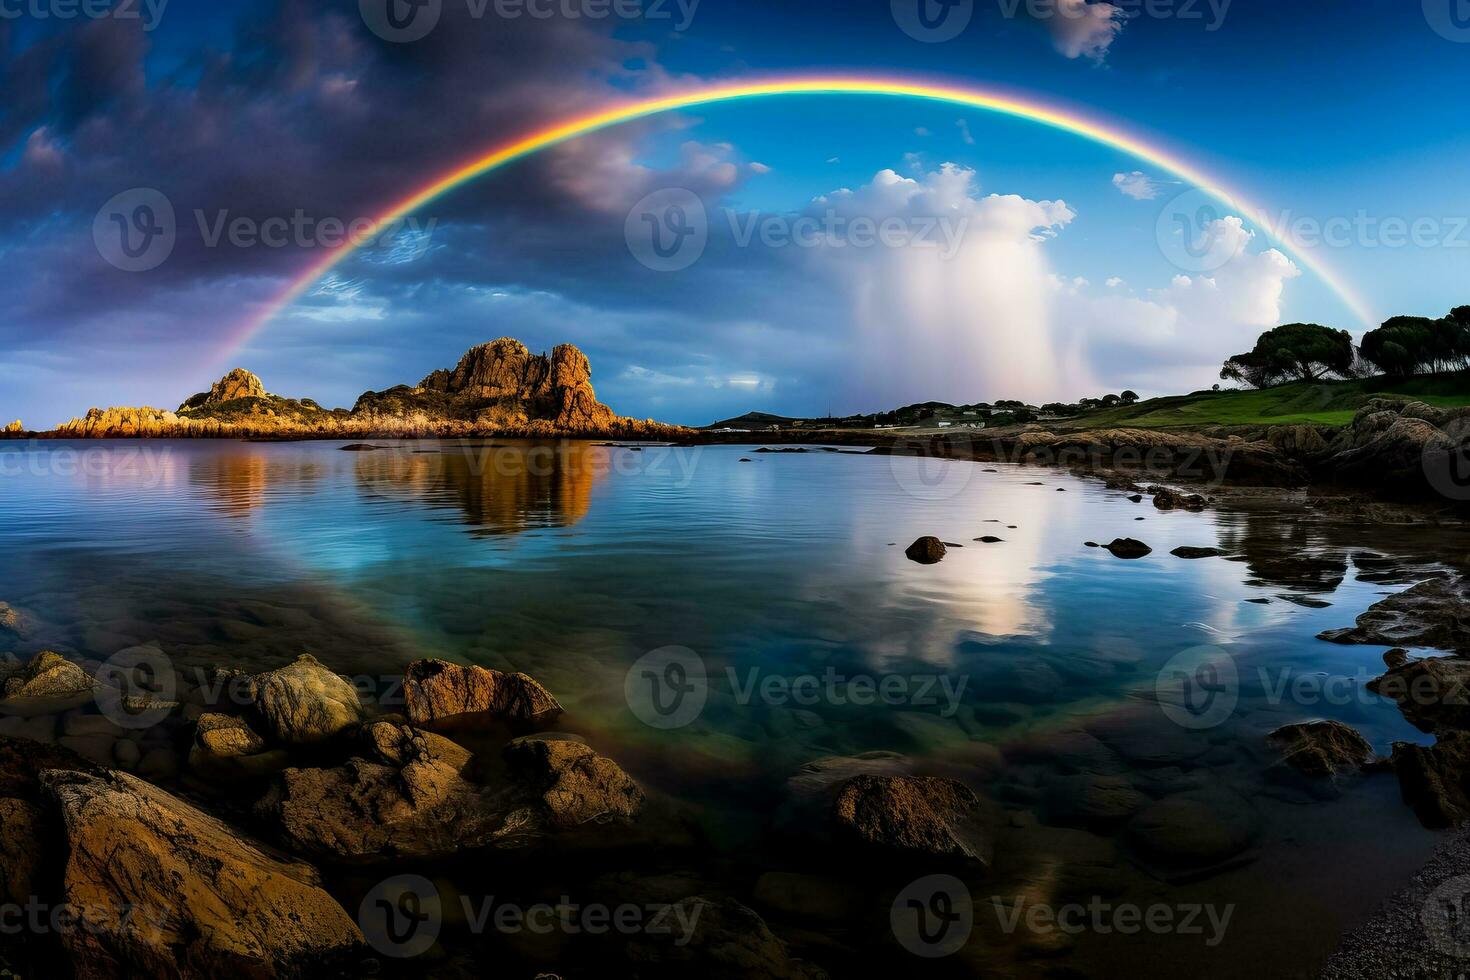 A magnificent moonbow arcs over a serene coastal landscape casting a colorful reflection on the glistening waters photo